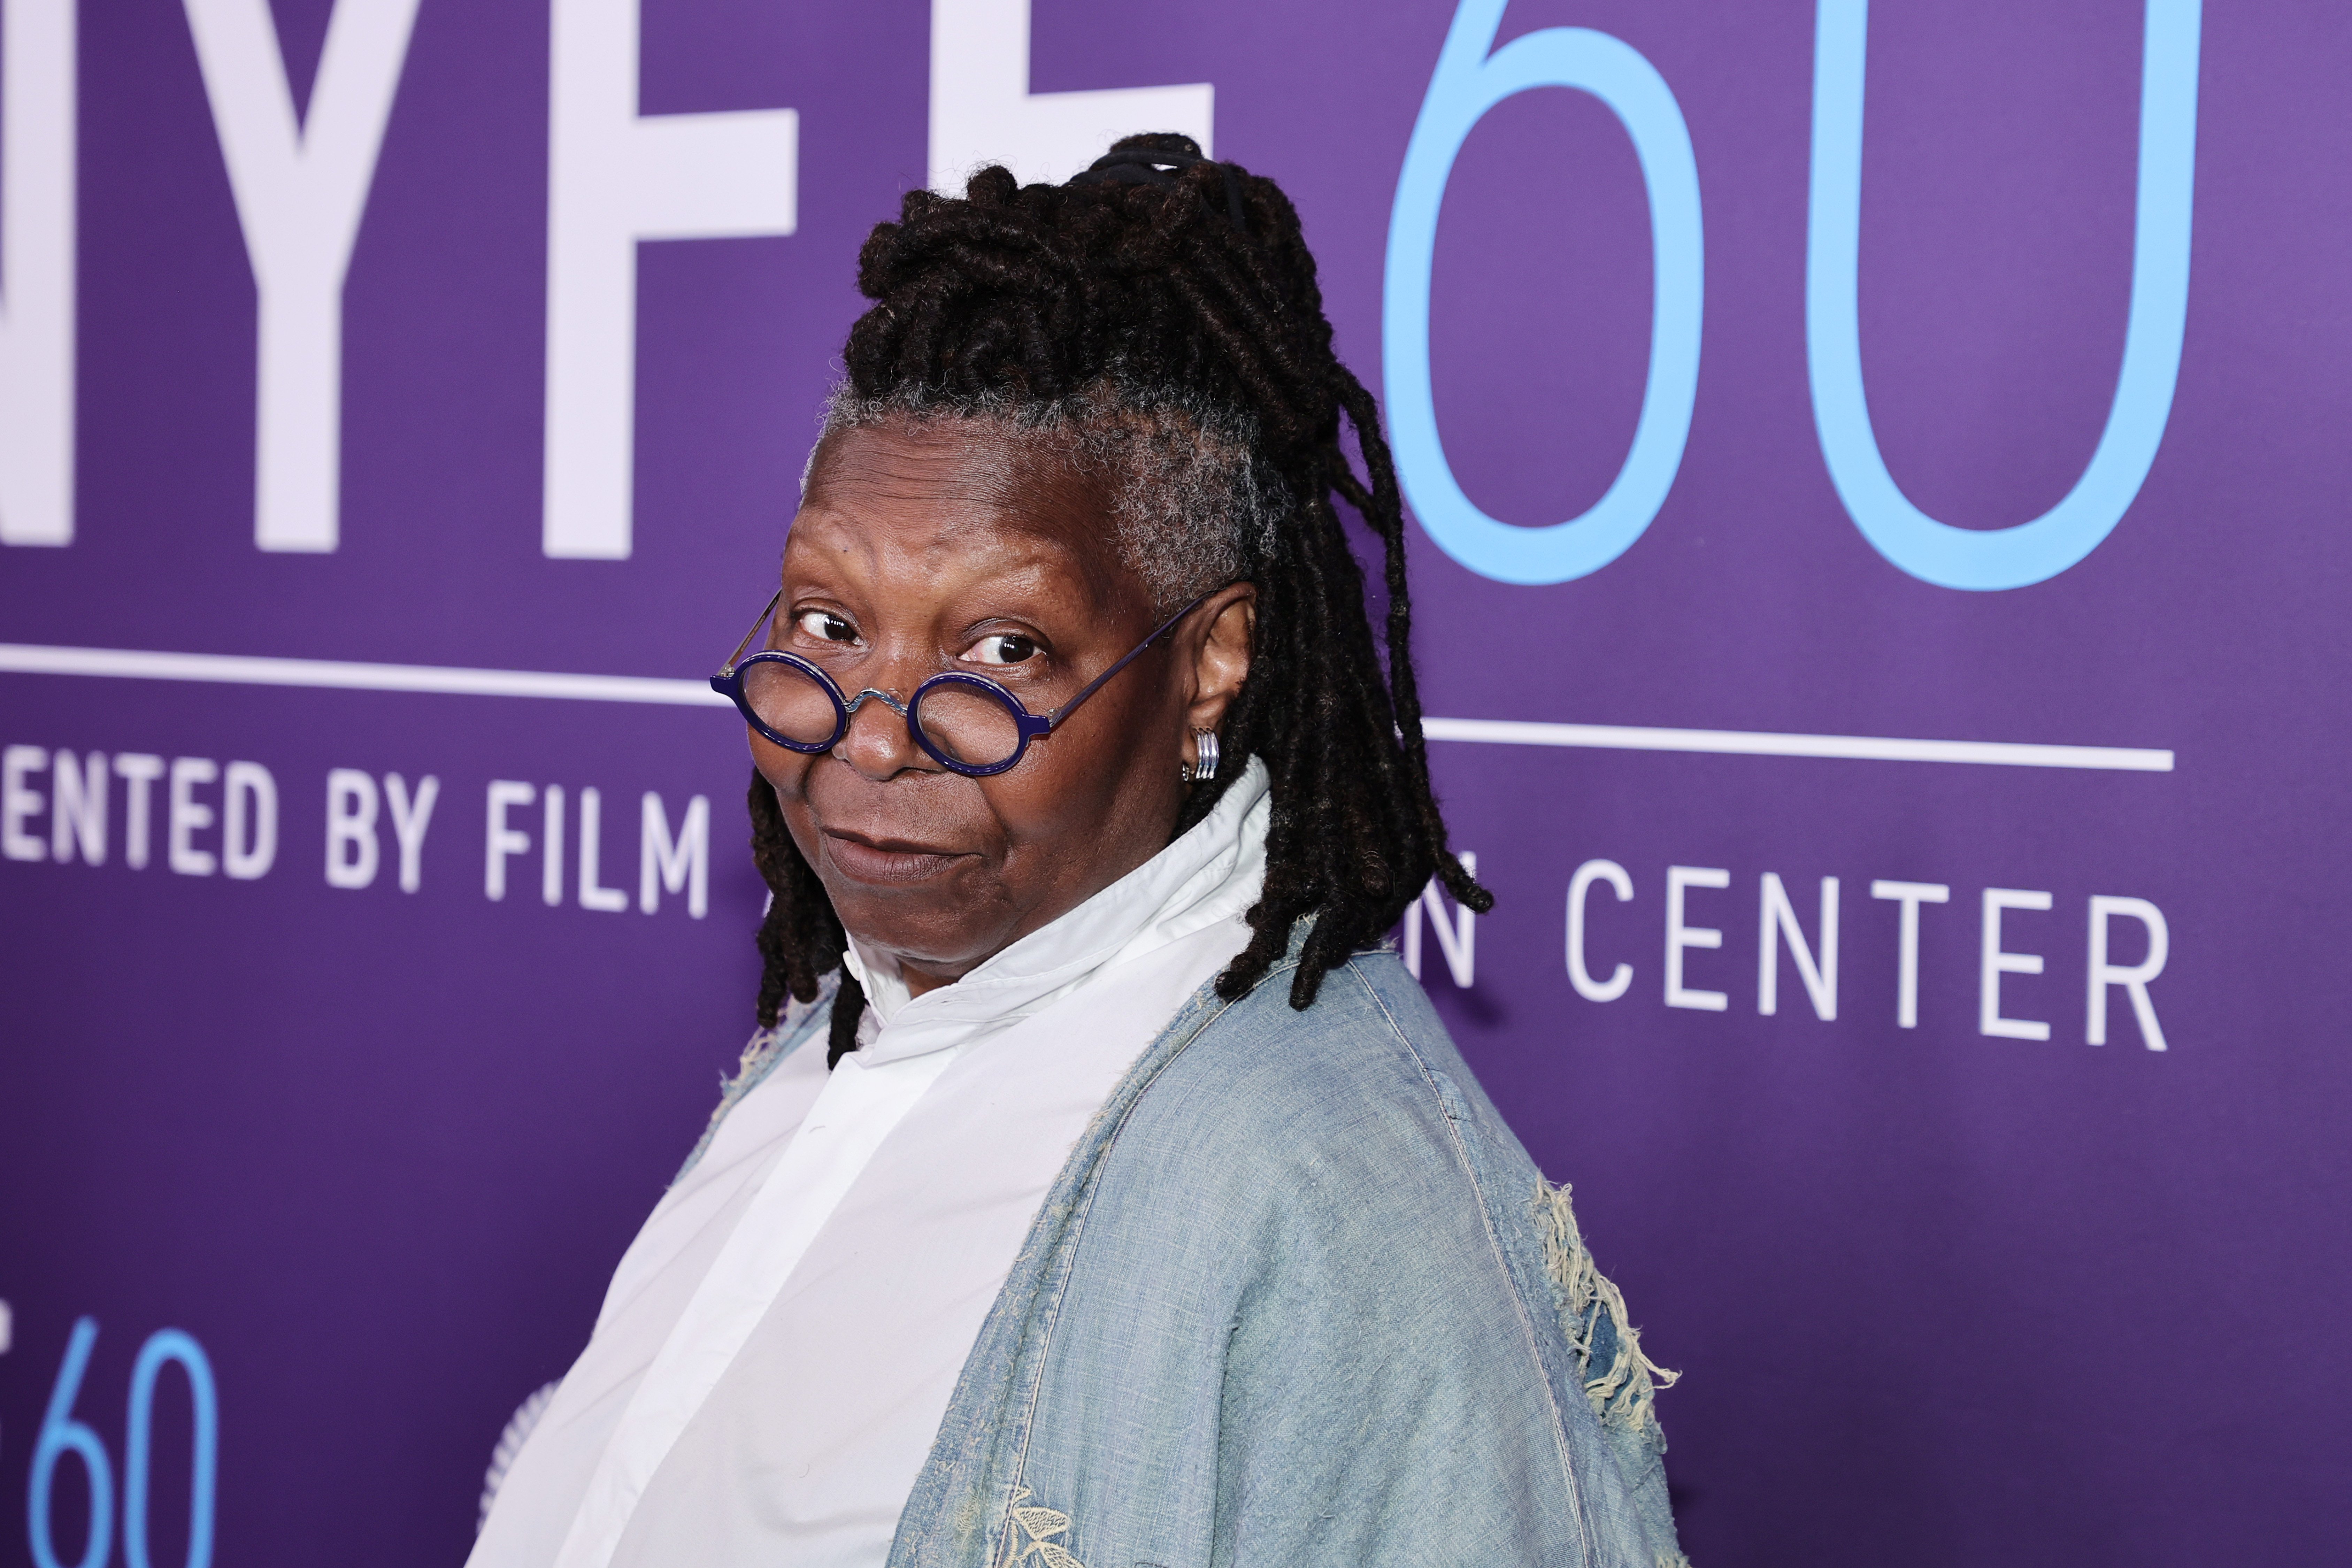  Whoopi Goldberg is pictured at the premiere of "Till" during the 60th New York Film Festival at Alice Tully Hall, Lincoln Center, on October 1, 2022, in New York City | Source: Getty Images